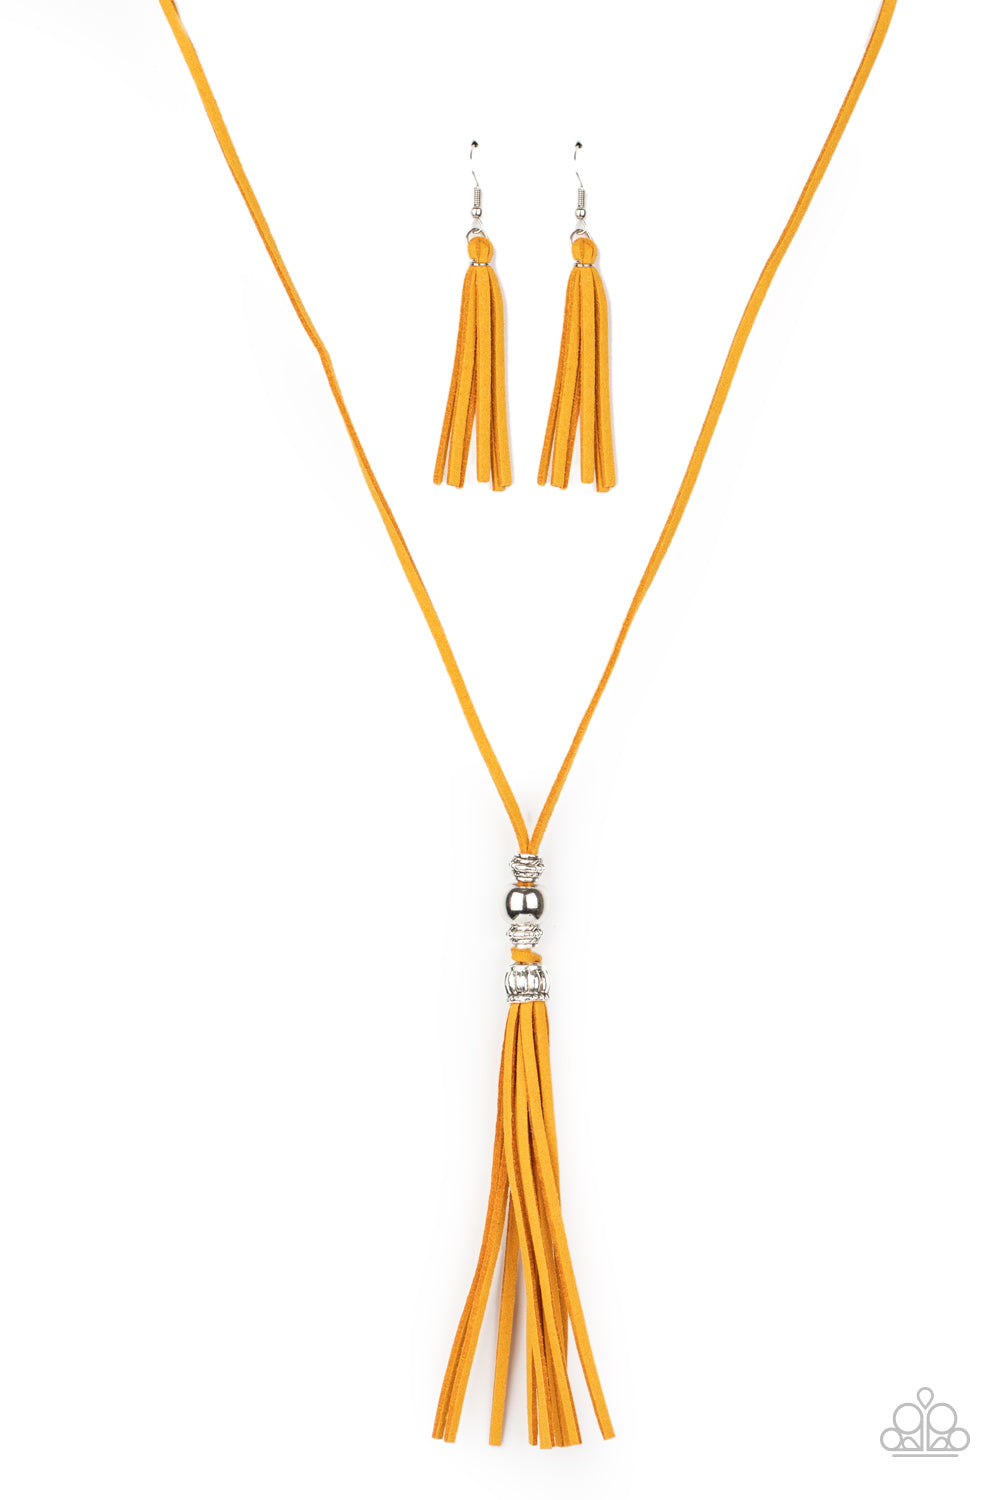 Paparazzi Accessories - Hold My Tassel - Yellow Necklace - Alies Bling Bar